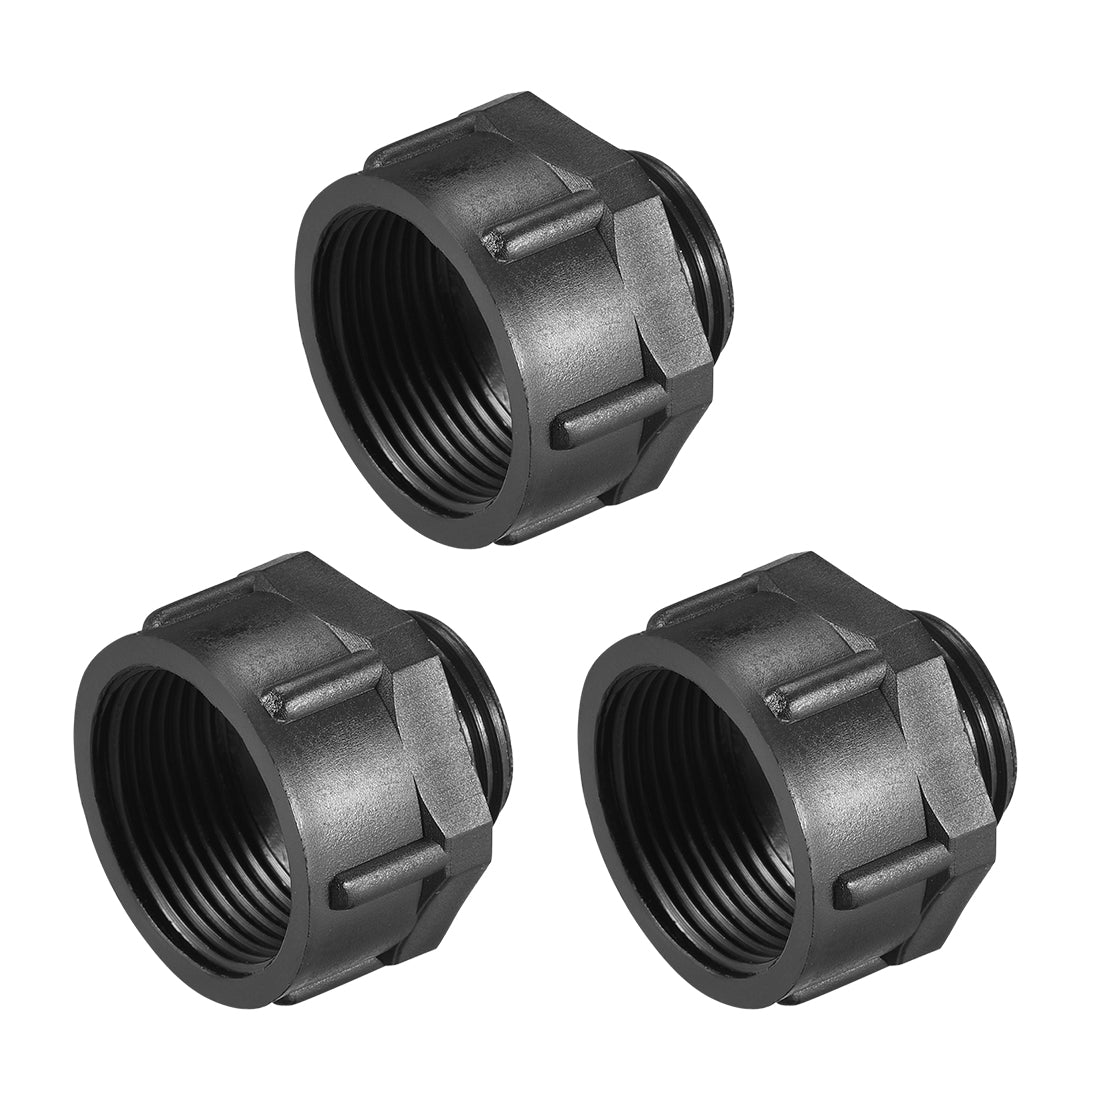 uxcell Uxcell Threaded Bushings Nylon Connector Adaptor M20 Outer Thread to M25 Inner Thread Black , 3 Pcs